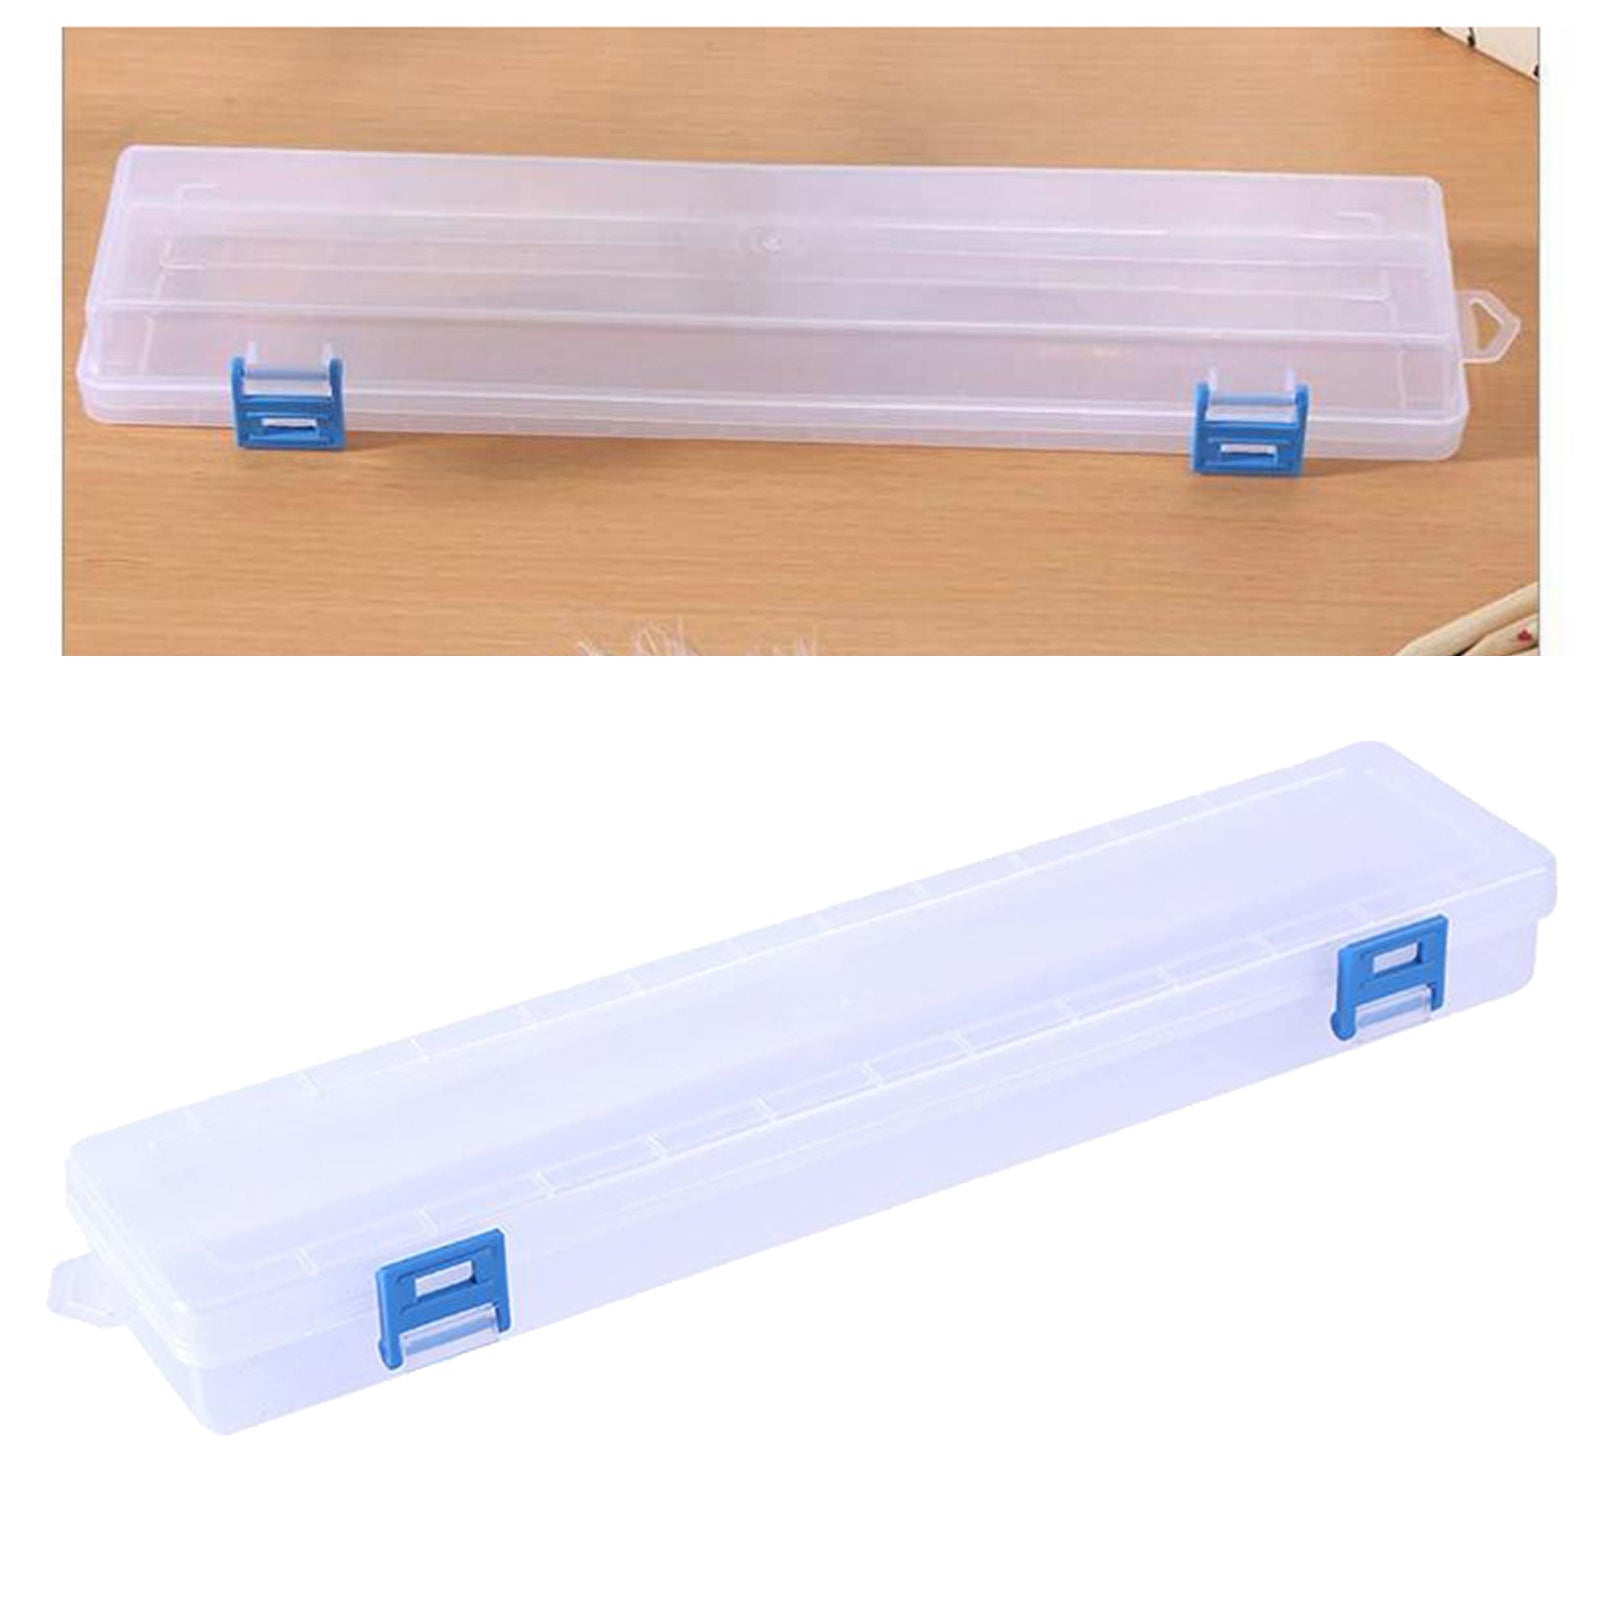 Plastic storage container for brushes, tool beads, crafting from